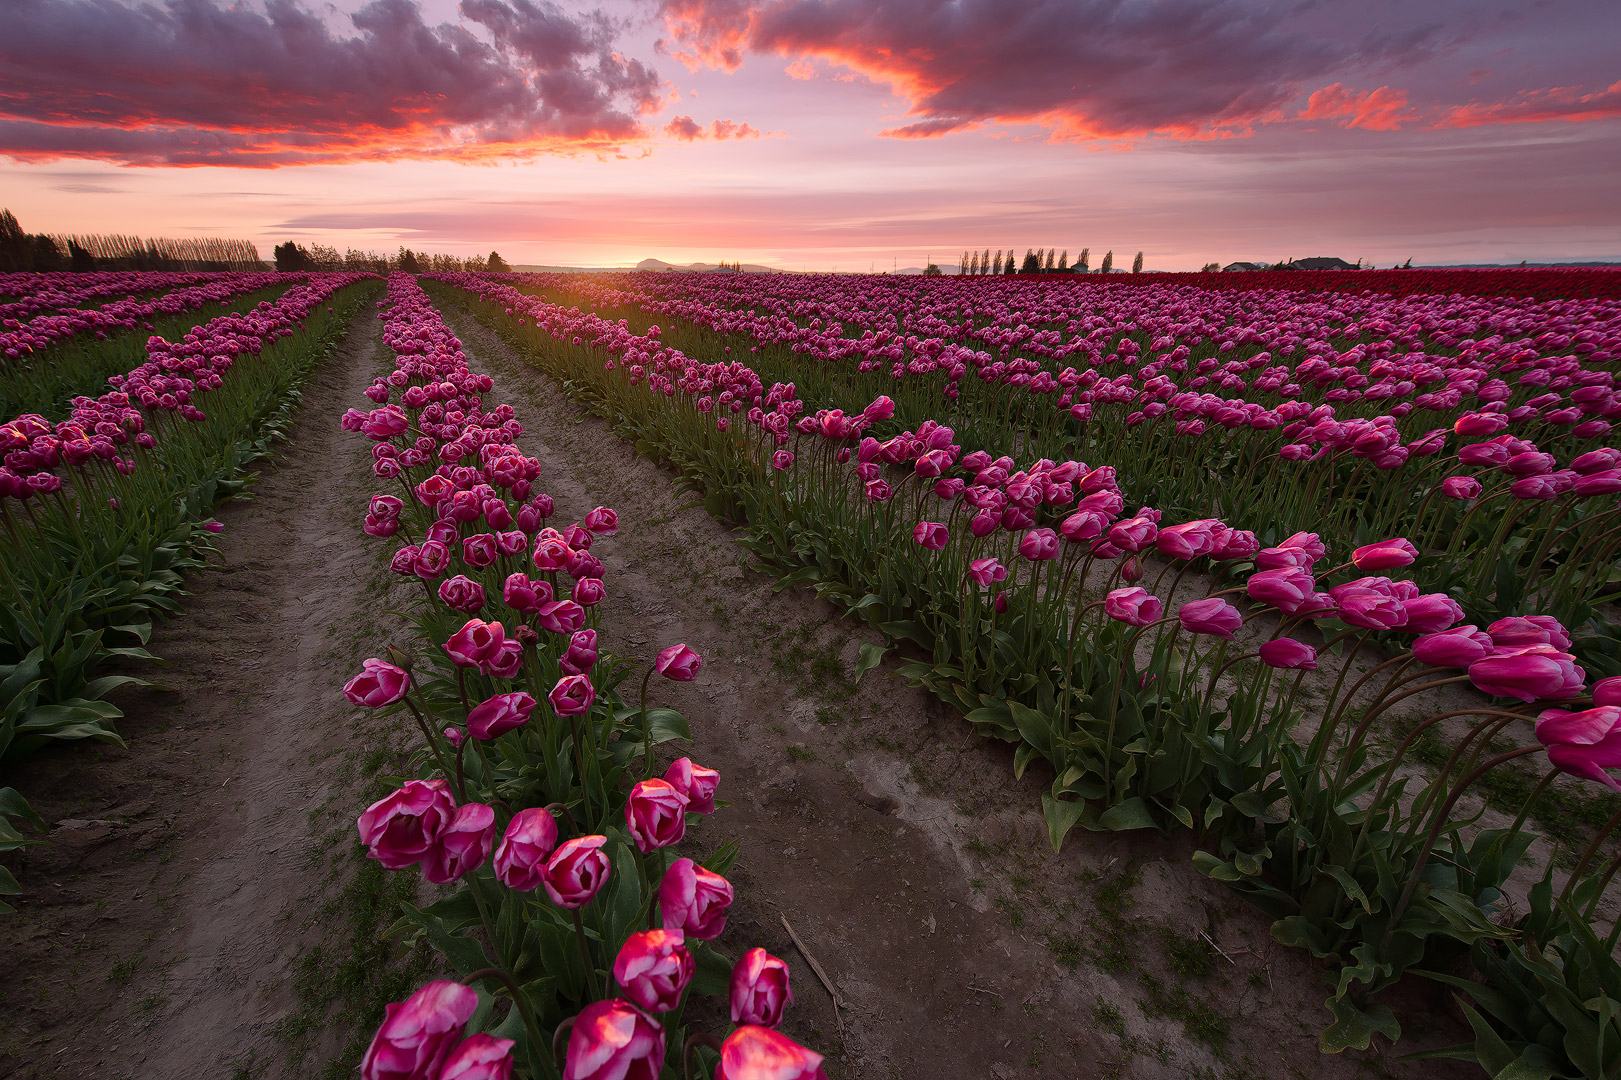 harvested blooms, laconner, washington, tulips, flowers, pink, sunset, farms, bernard chen, timescapes